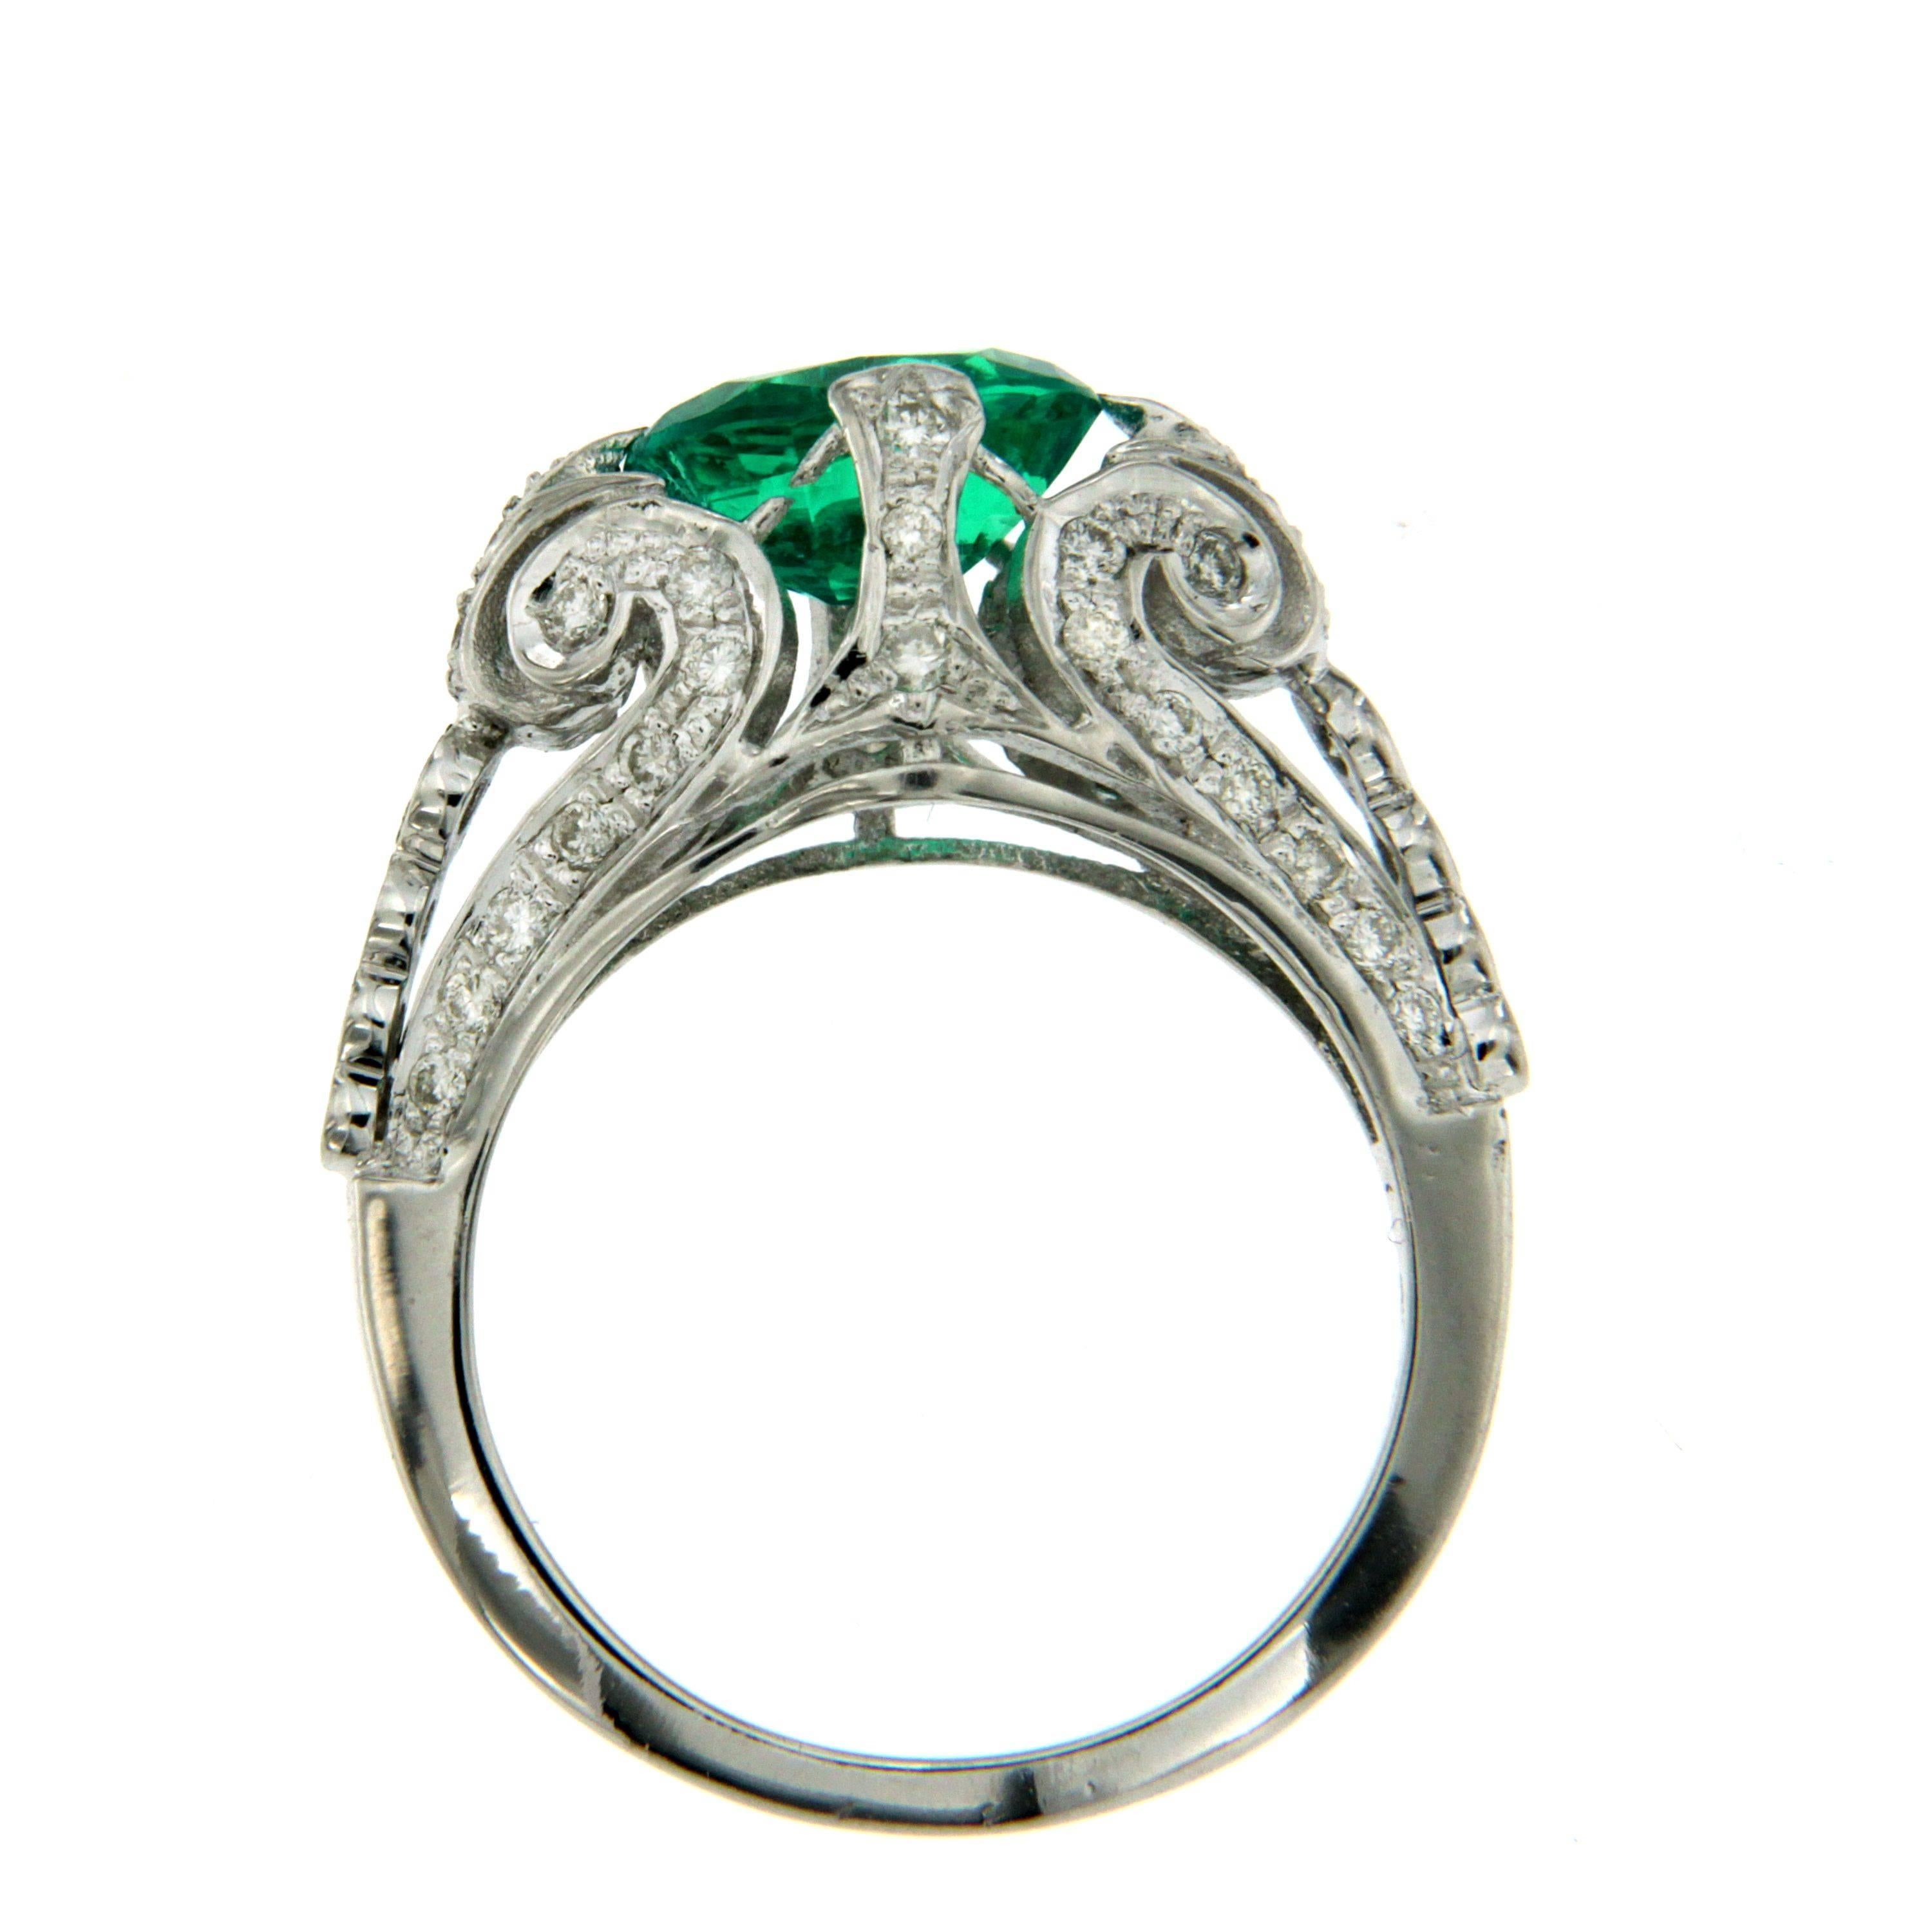 A beautiful Engagement ring, set with an oval mixed cut synthetic Vivid Emerald of absolute beauty weighing an 1.55 ct, surrounded by old mine-cut diamonds, weighing approx. total of 1.00, with diamond set shoulders, mounted in 18k white gold. 